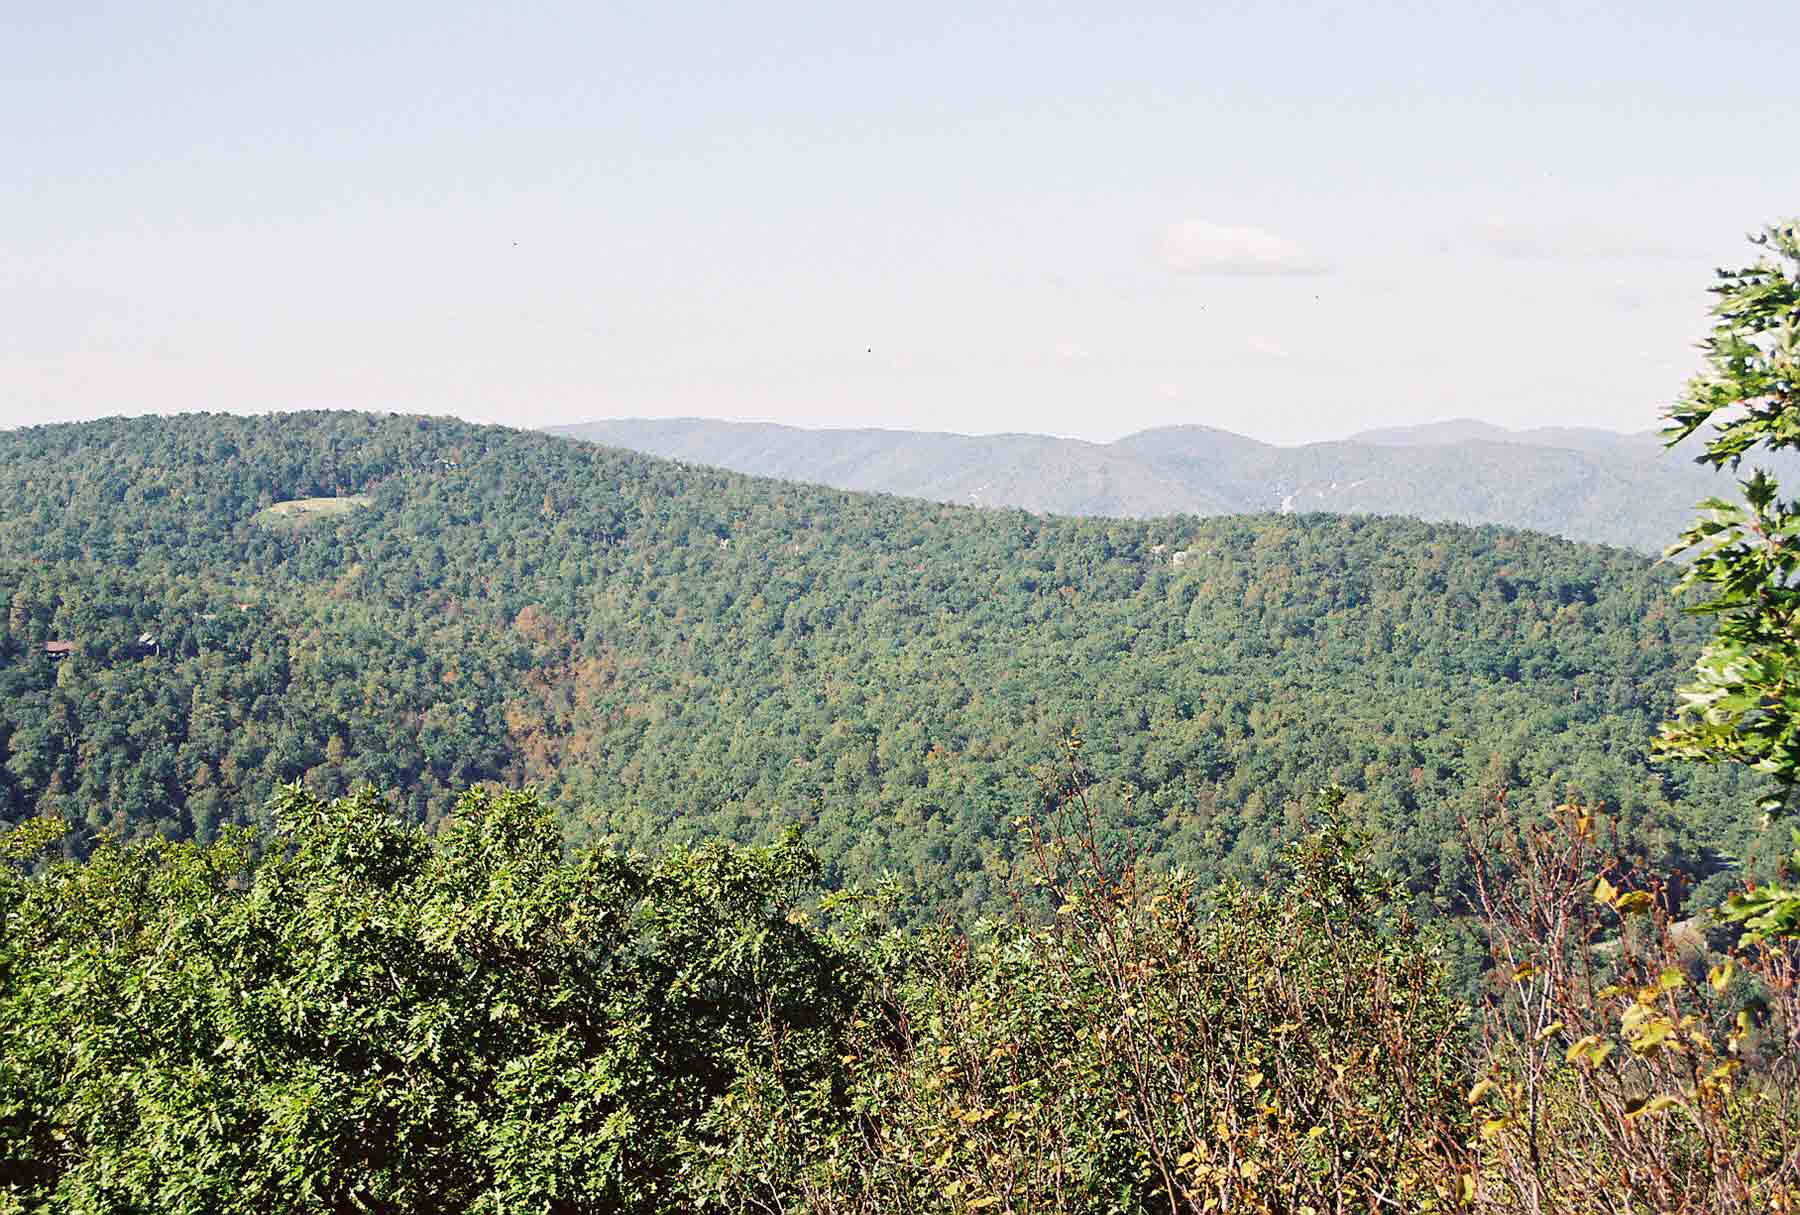 mm 13.4 - View west from ledge north of Dripping Rock Springs. In 2003 this was on the AT but the trail has been now been rerouted. The old route is a blue-blazed trail. Courtesy dlcul@conncoll.edu